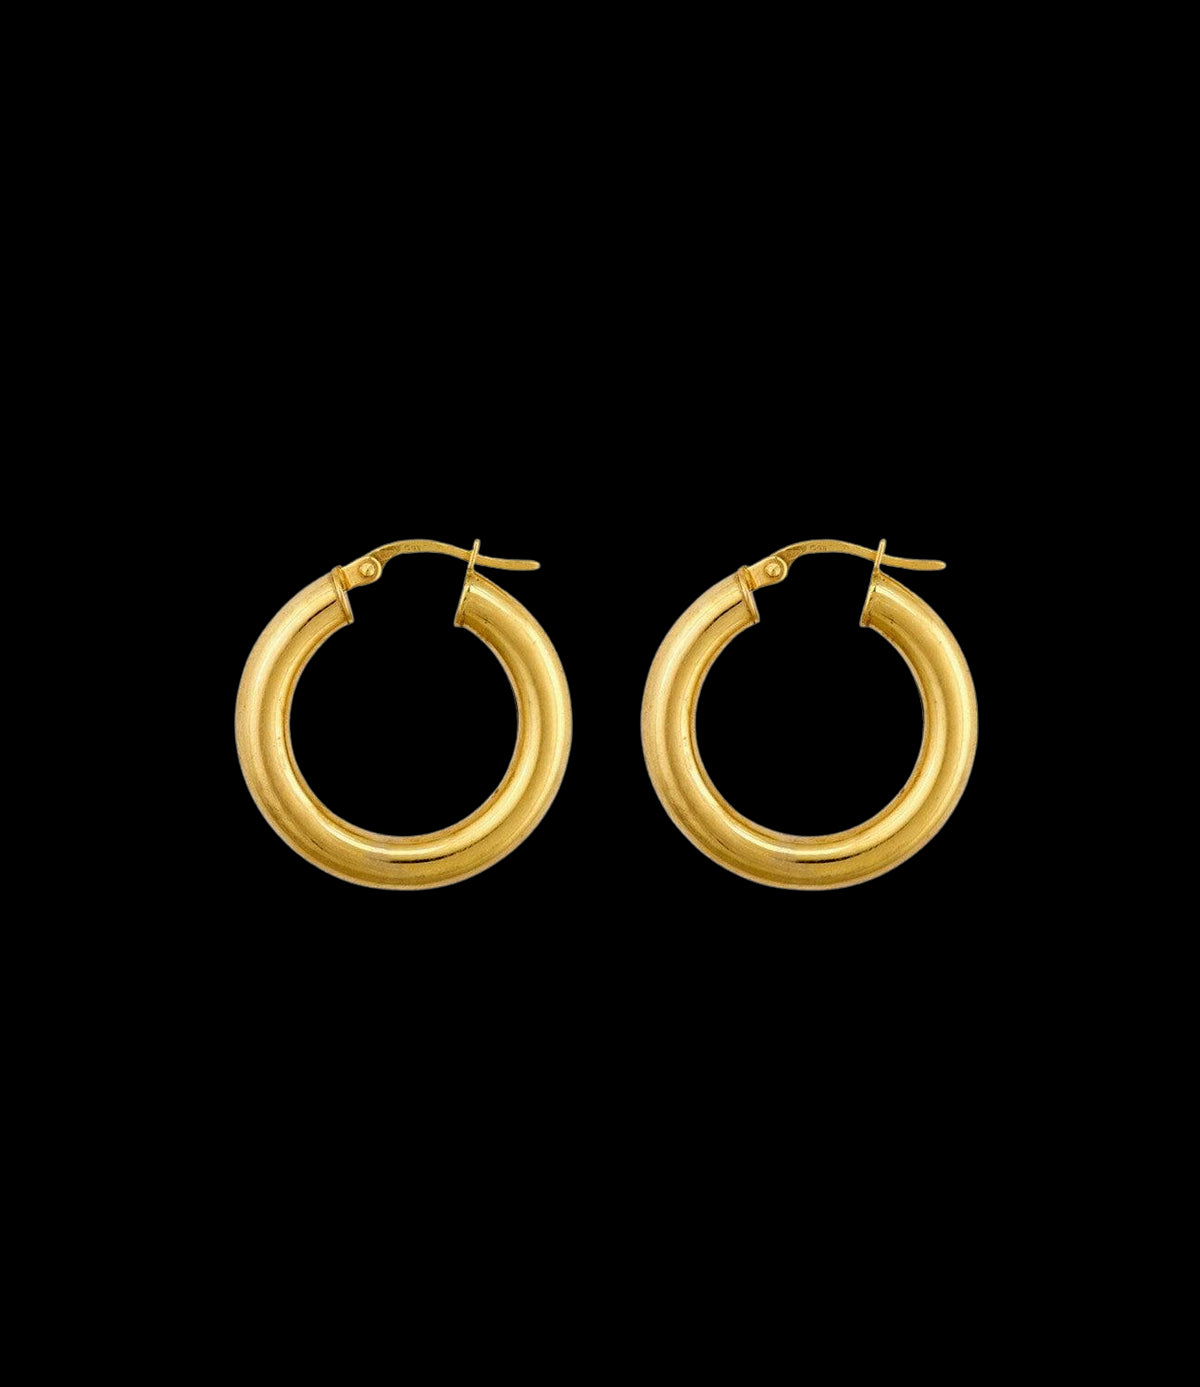 The Chloe Everyday Gold Hoops